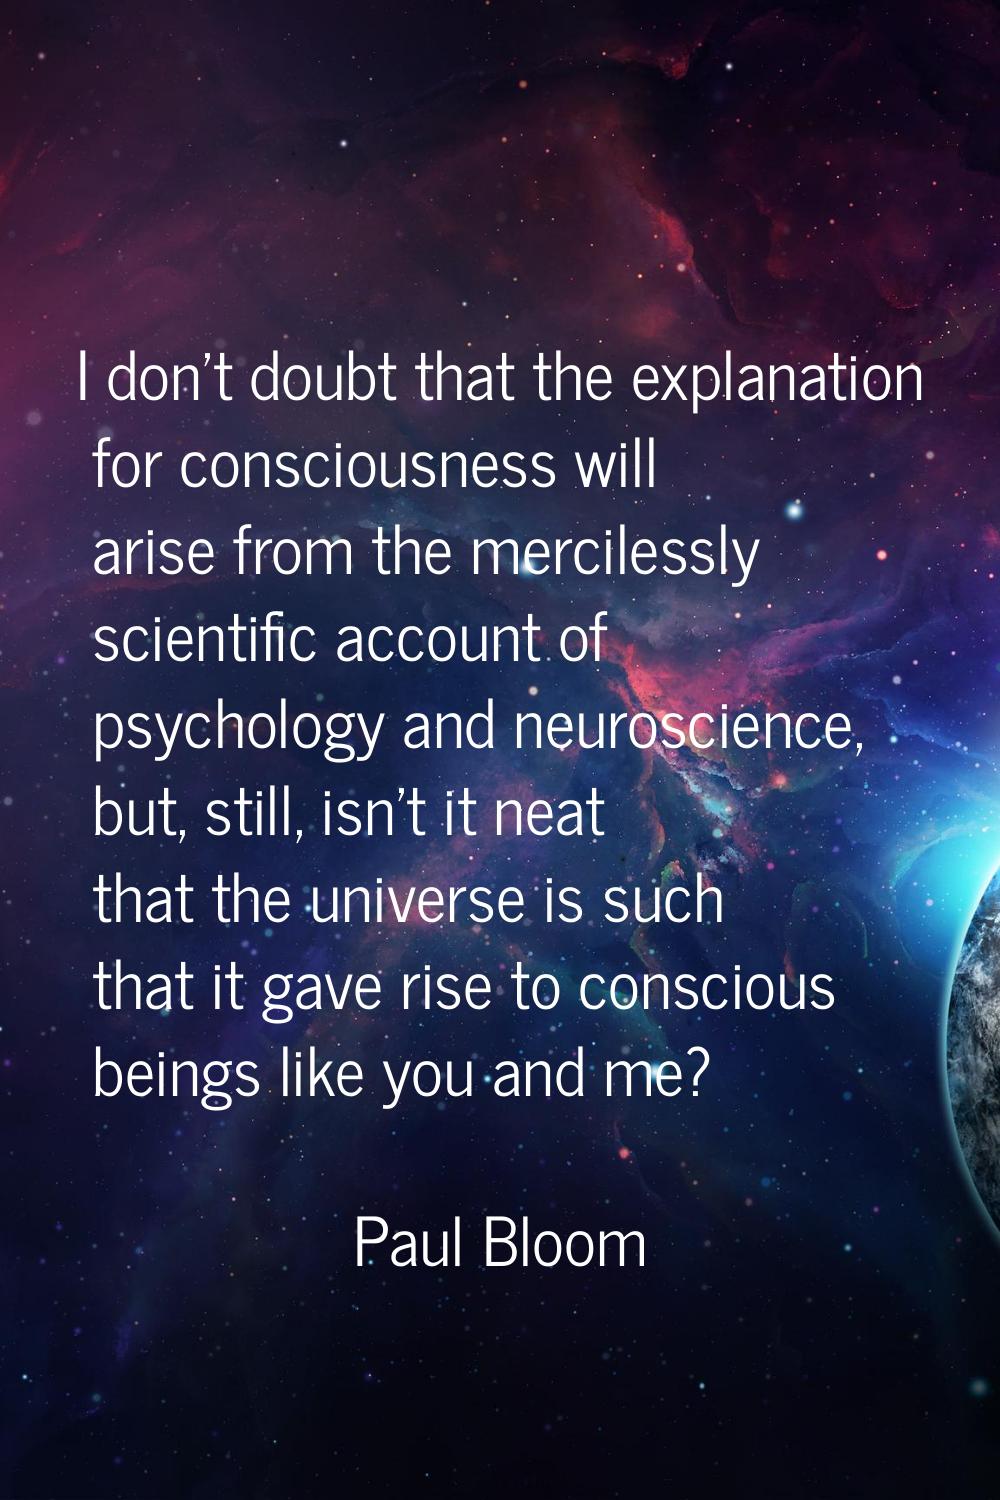 I don't doubt that the explanation for consciousness will arise from the mercilessly scientific acc